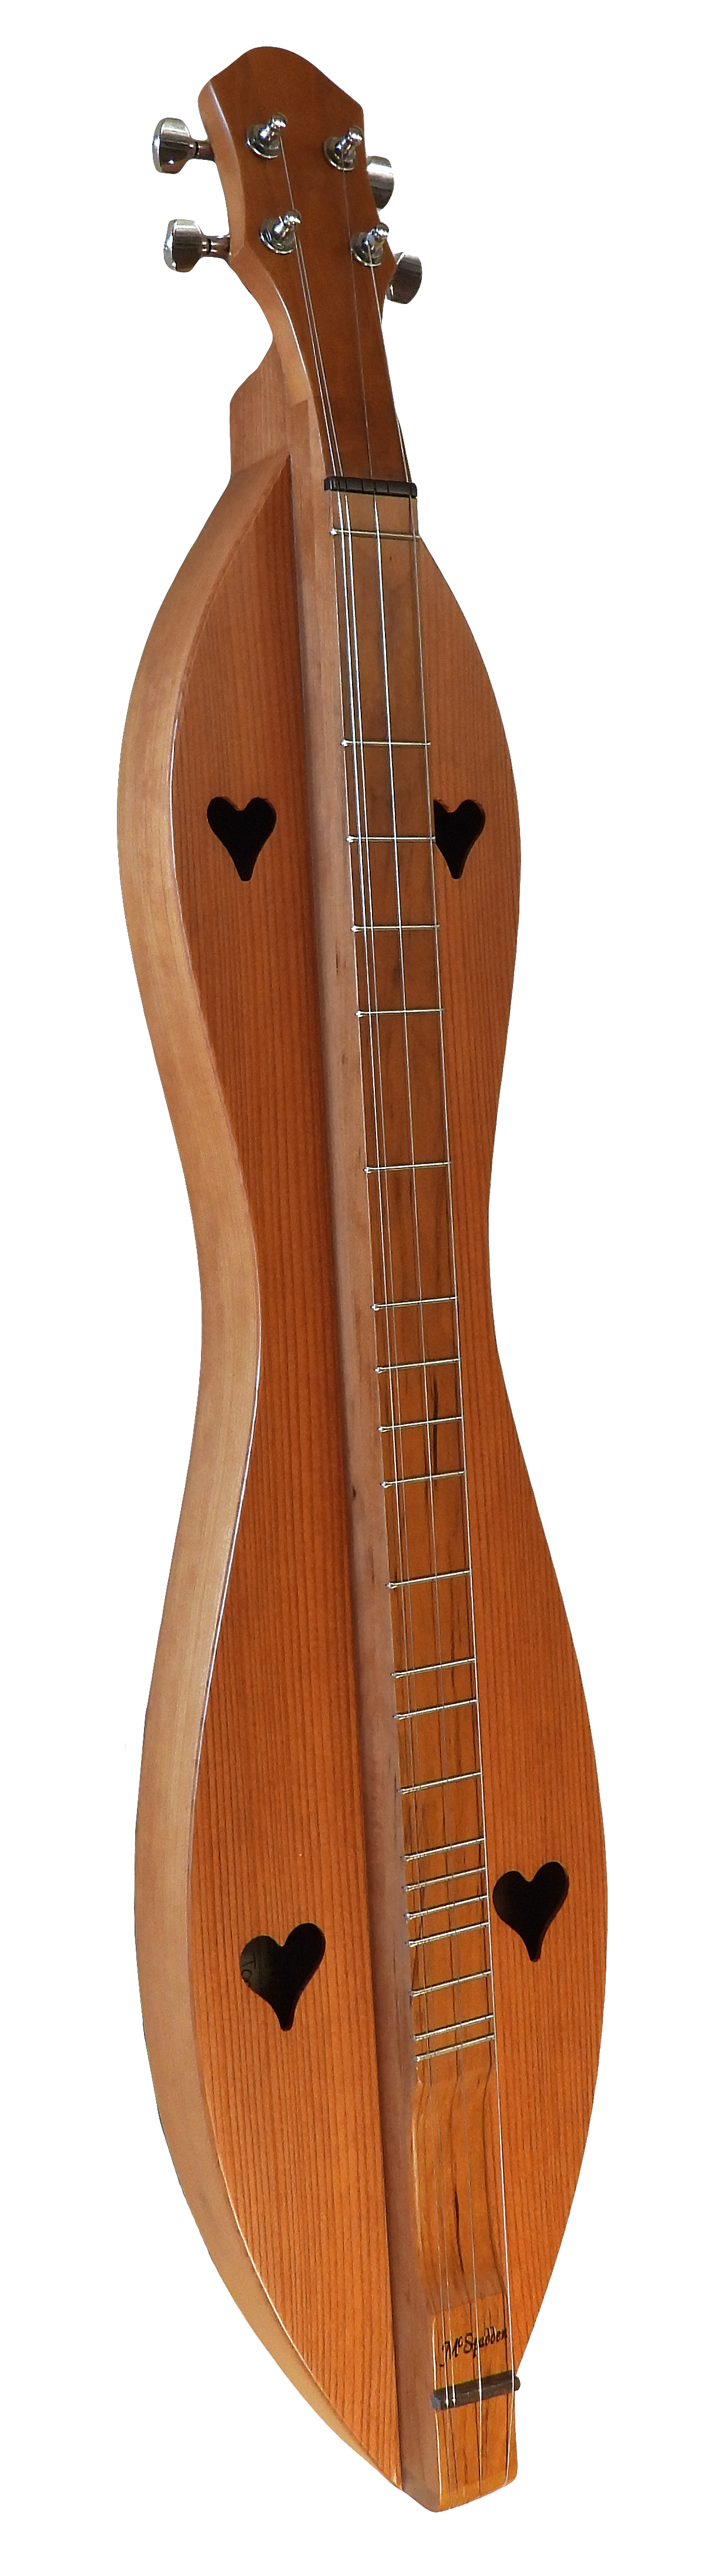 A 4 String, Flathead, Hourglass with Cherry back, sides and Redwood top (4FH26CR) dulcimer with a lifetime warranty on a white background.